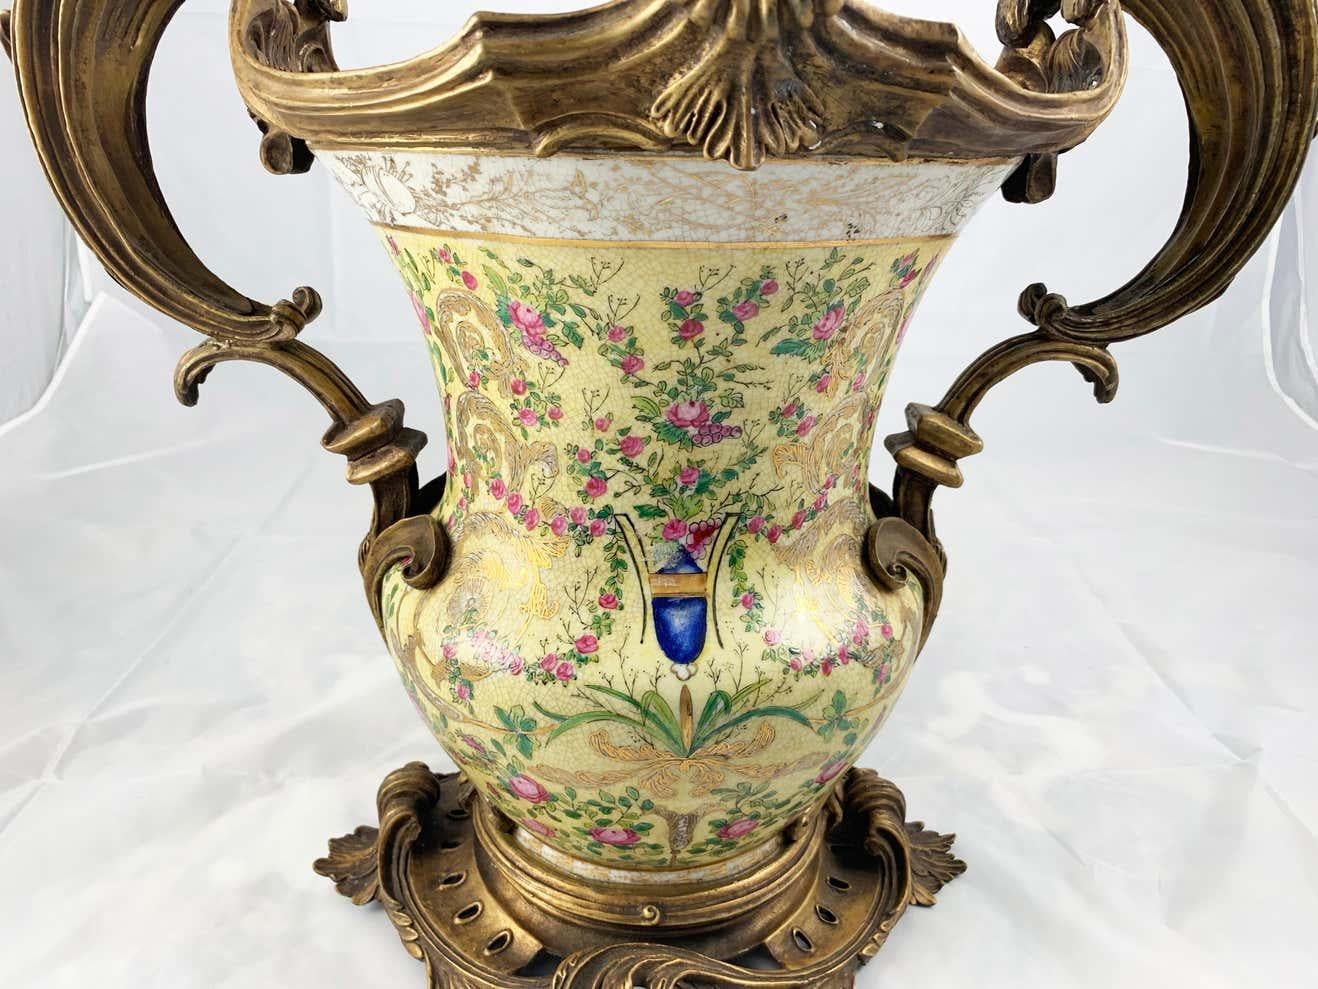 20th Century Pair of French Porcelain and Ormolu-Mounted Twin Handled Urns For Sale 4